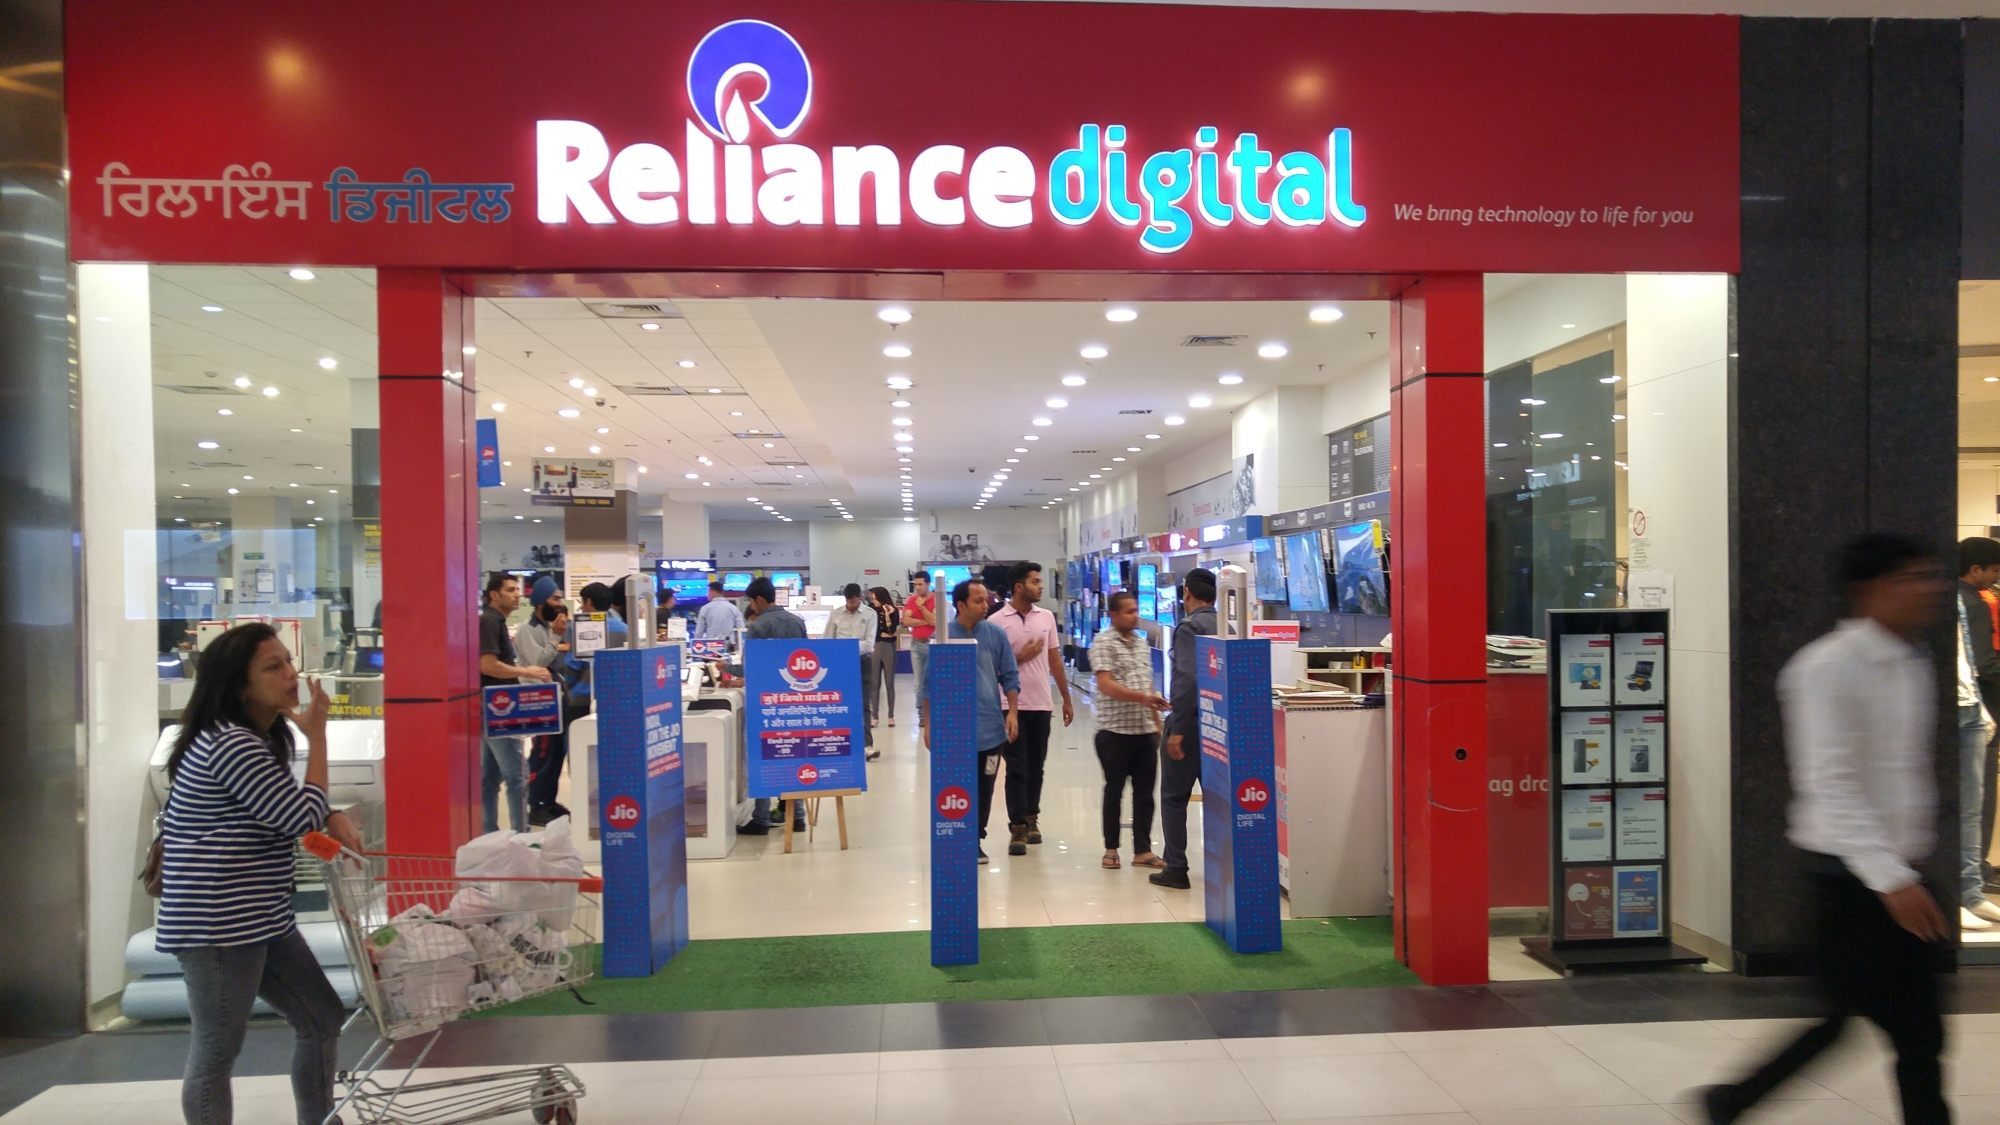 OnePlus, Reliance Digital partner to elevate customer experience in India